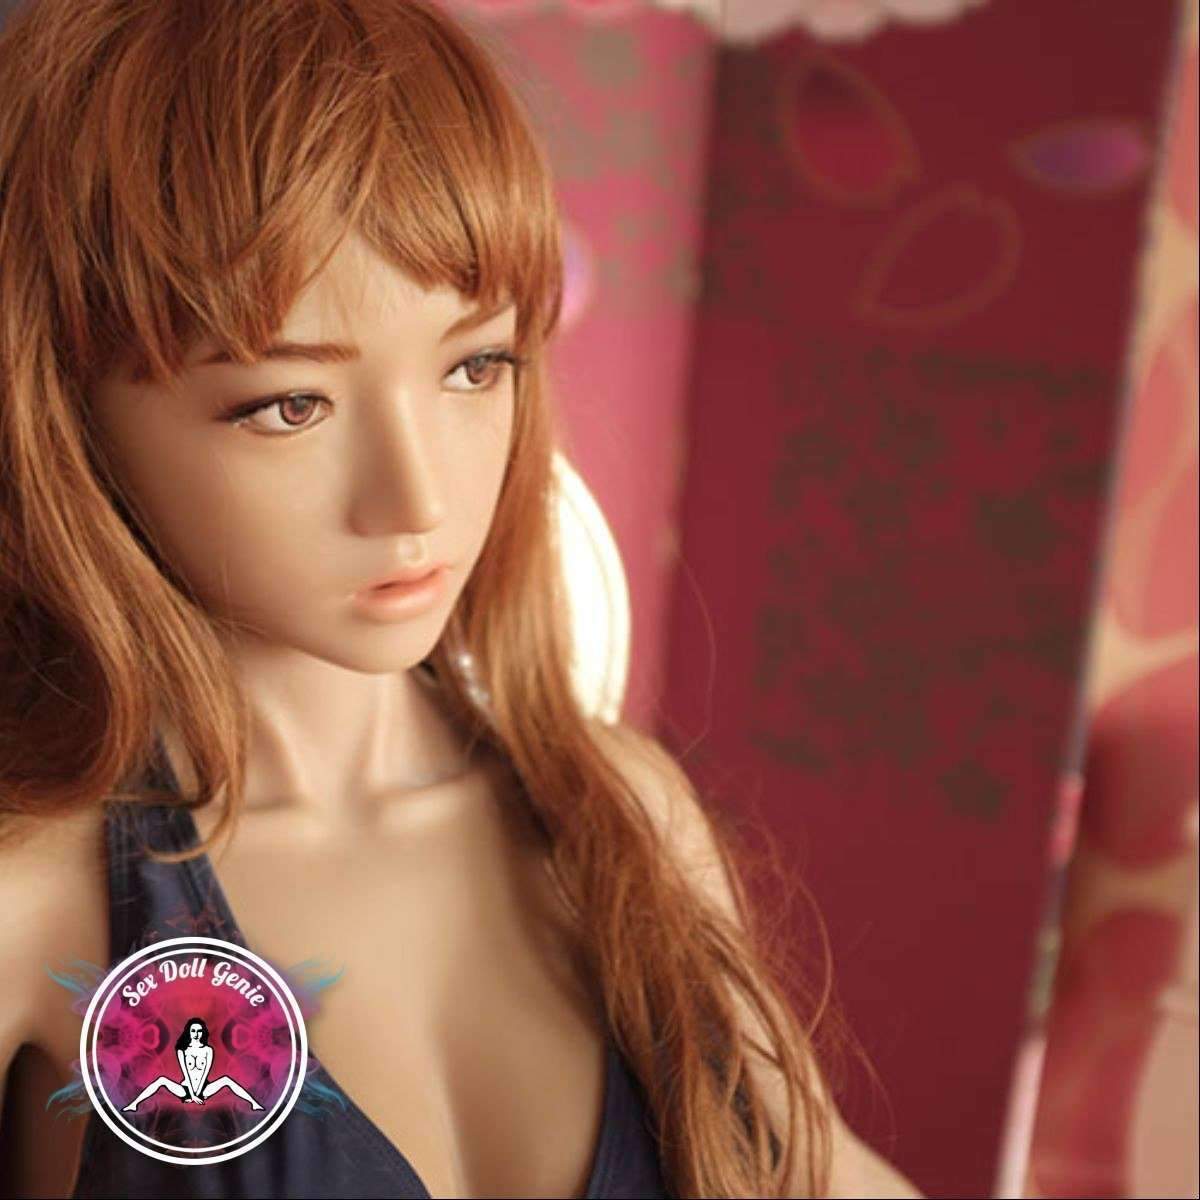 DS Doll - 163Plus - Samantha (Elf) Head - Type 1 D Cup Silicone Doll-13